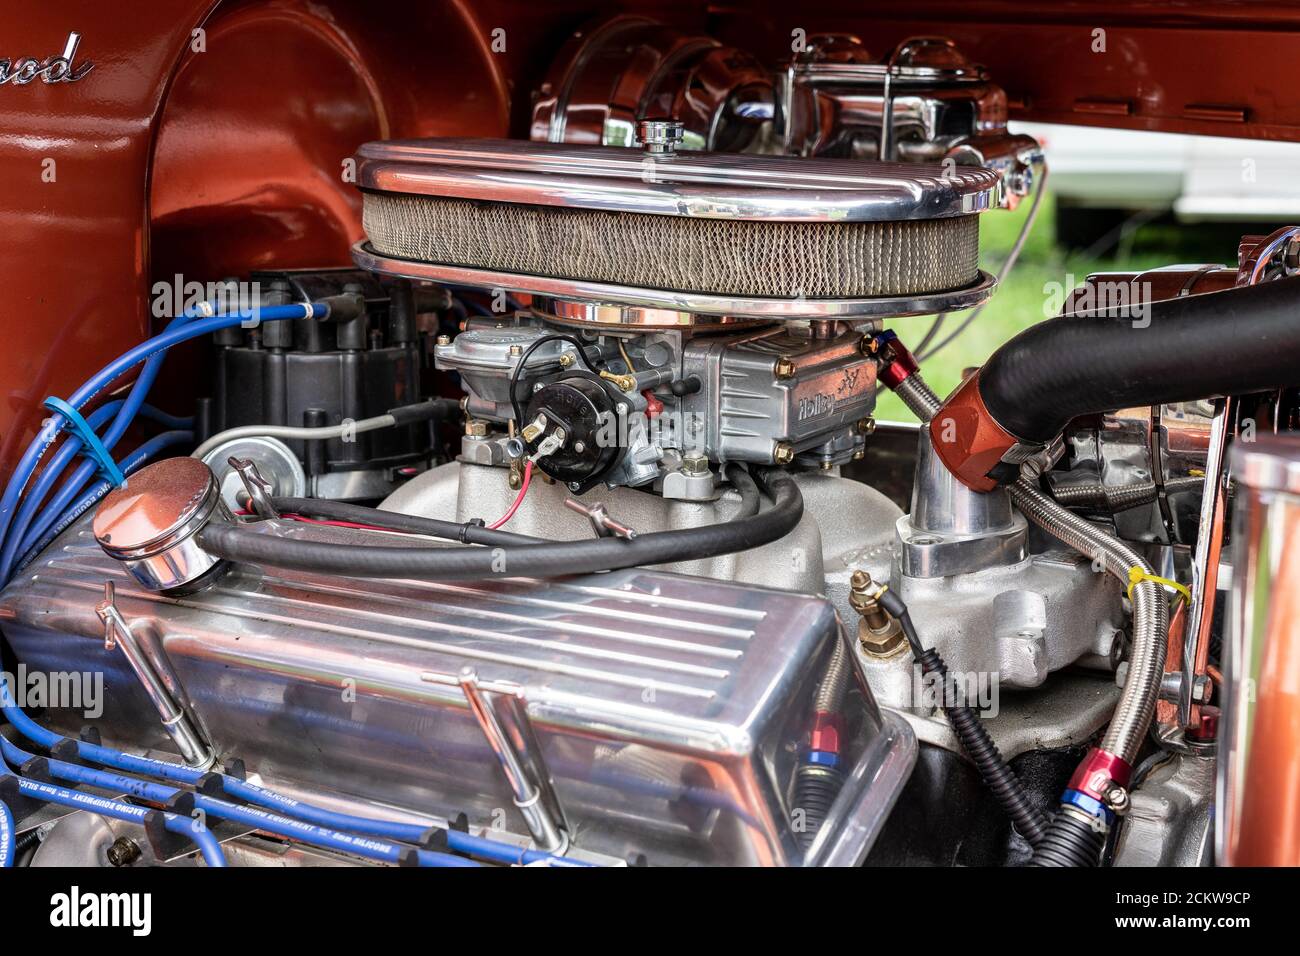 DIEDERSDORF, GERMANY - AUGUST 30, 2020: The engine of vintage car Chevrolet, 1930. The exhibition of 'US Car Classics'. Stock Photo